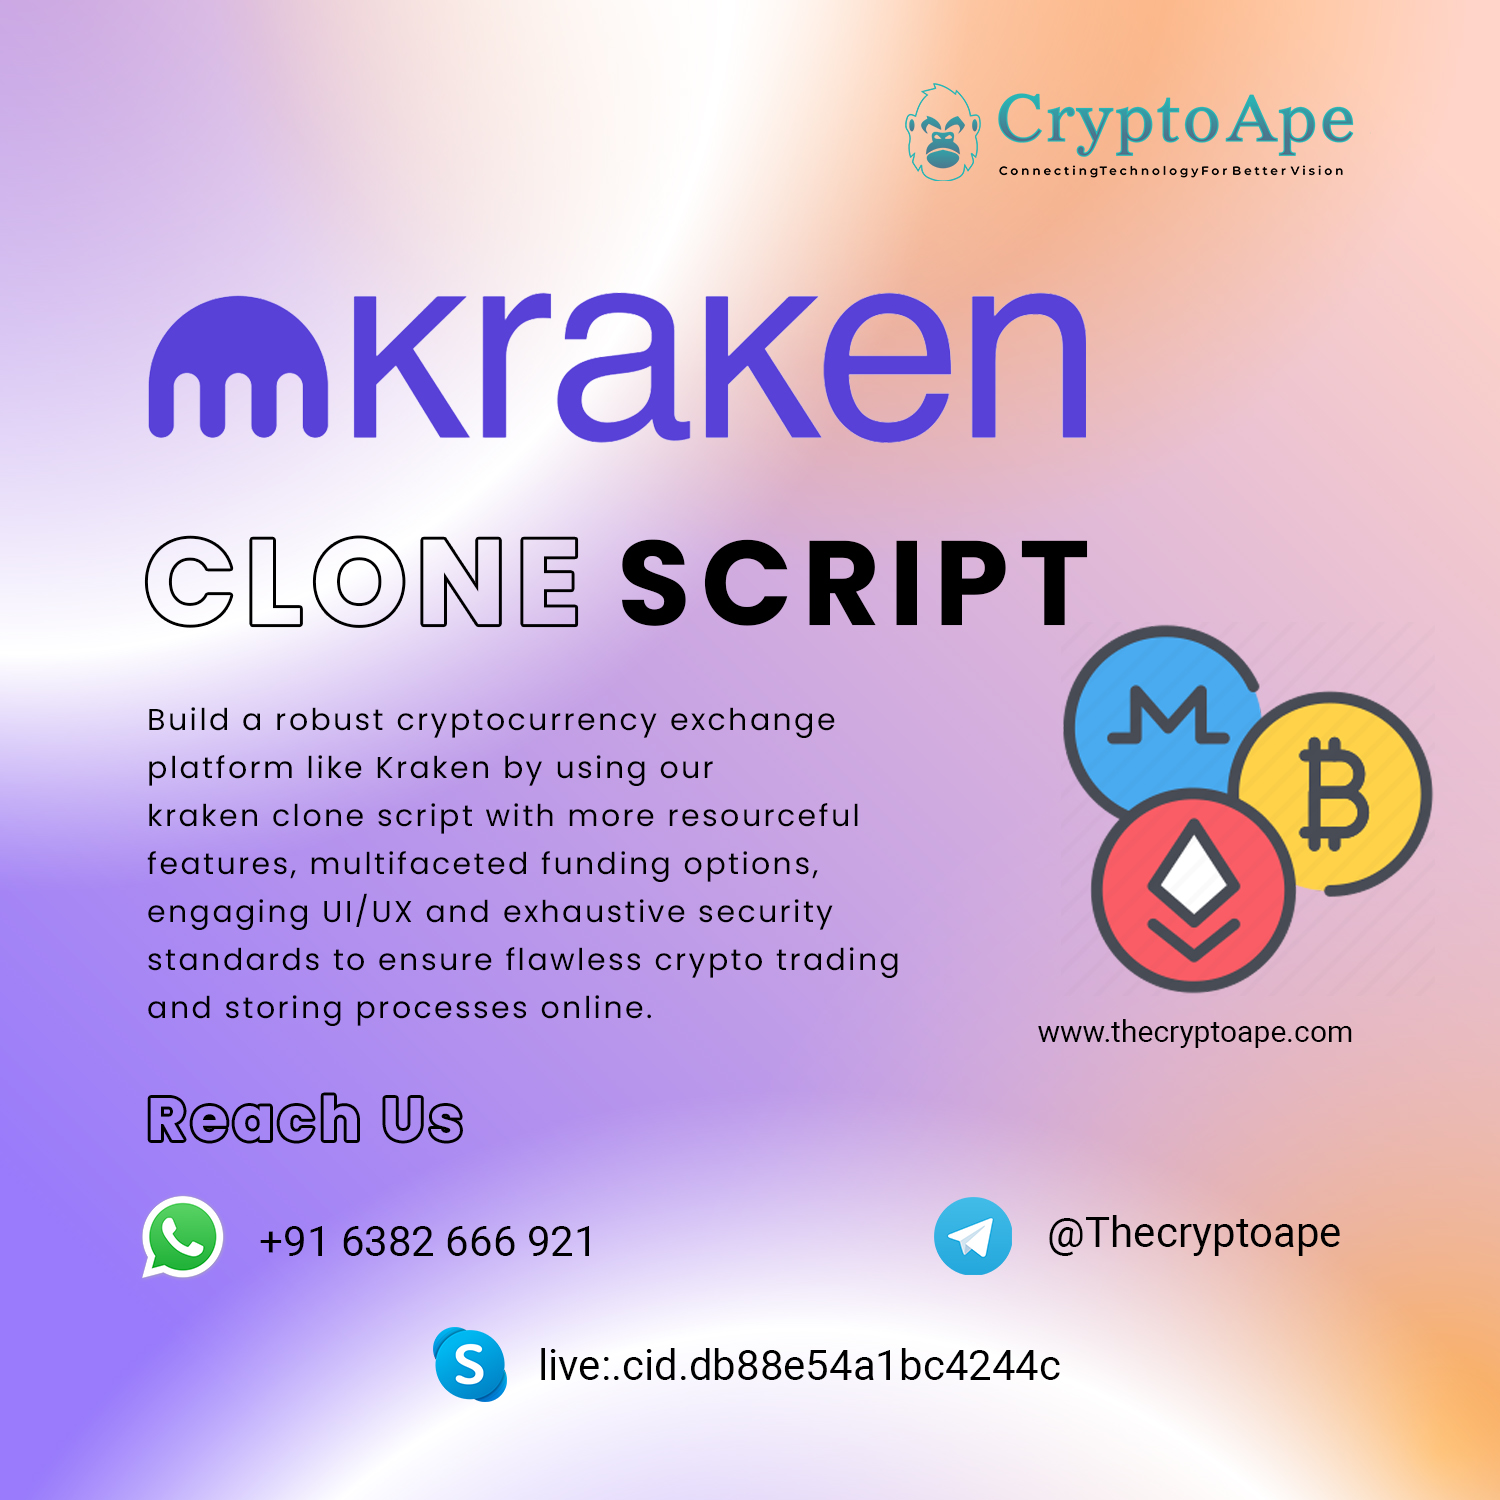 +1 CryptoAp

ConnectingTechnologyFor Better Vision

MKrakern

CLORNE SCRIPT

Build a robust cryptocurrency exchange MM
platform like Kraken by using our

kraken clone script with more resourceful

features, multifaceted funding options,

engaging UI/UX and exhaustive security

standards to ensure flawless crypto trading

and storing processes online.
www.thecryptoape.com

Reach Us

LL) +916382 666 921 @Thecryptoape

9 live:.cid.db88e54a1bca244c